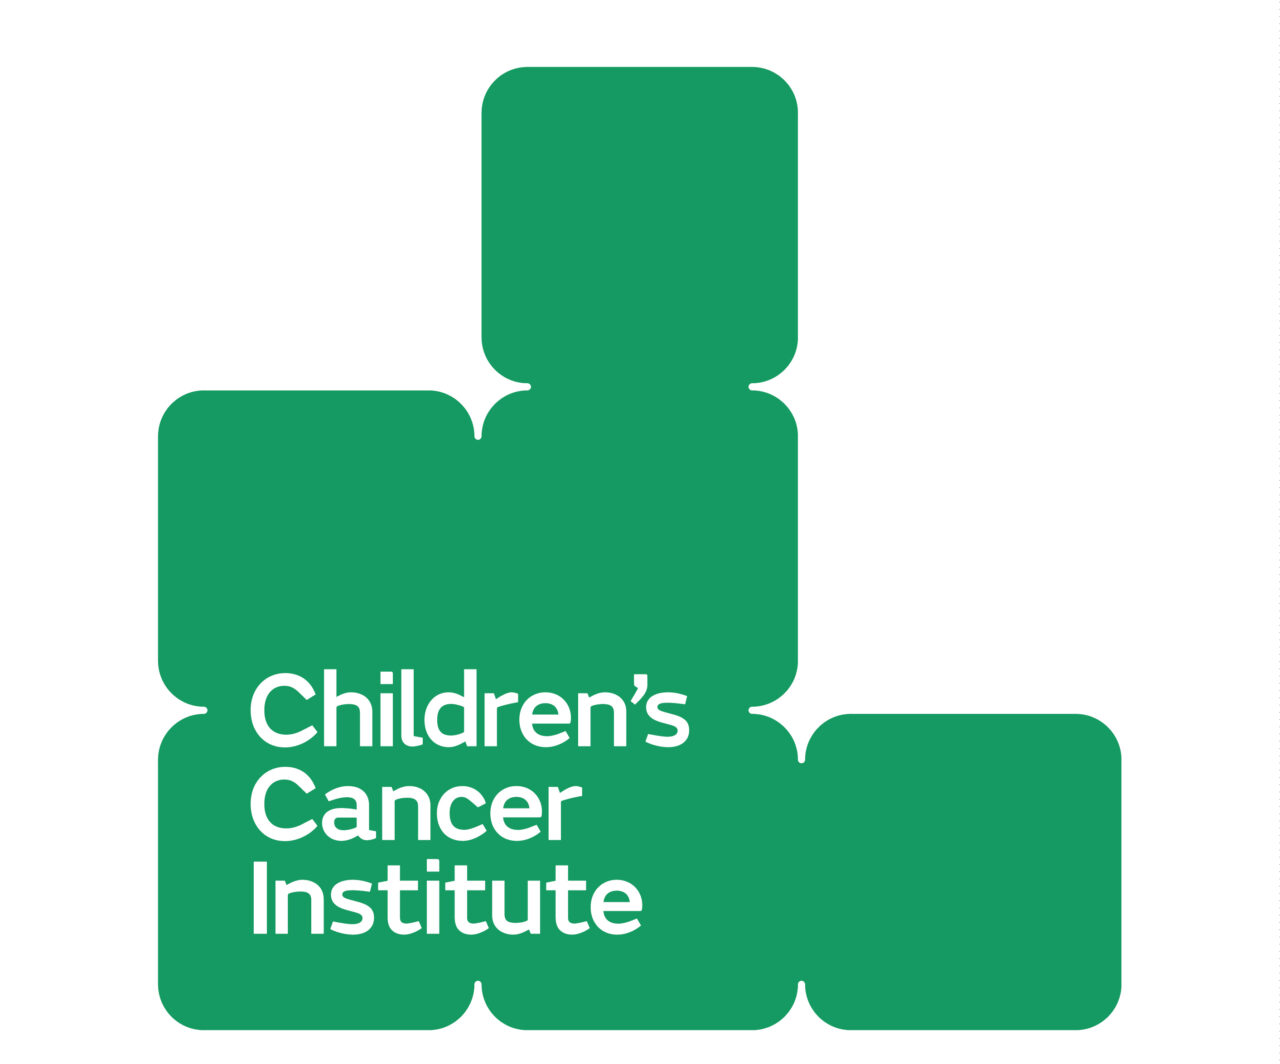 Children’s Cancer Institute is hiring for a marketing and fundraising systems administrator